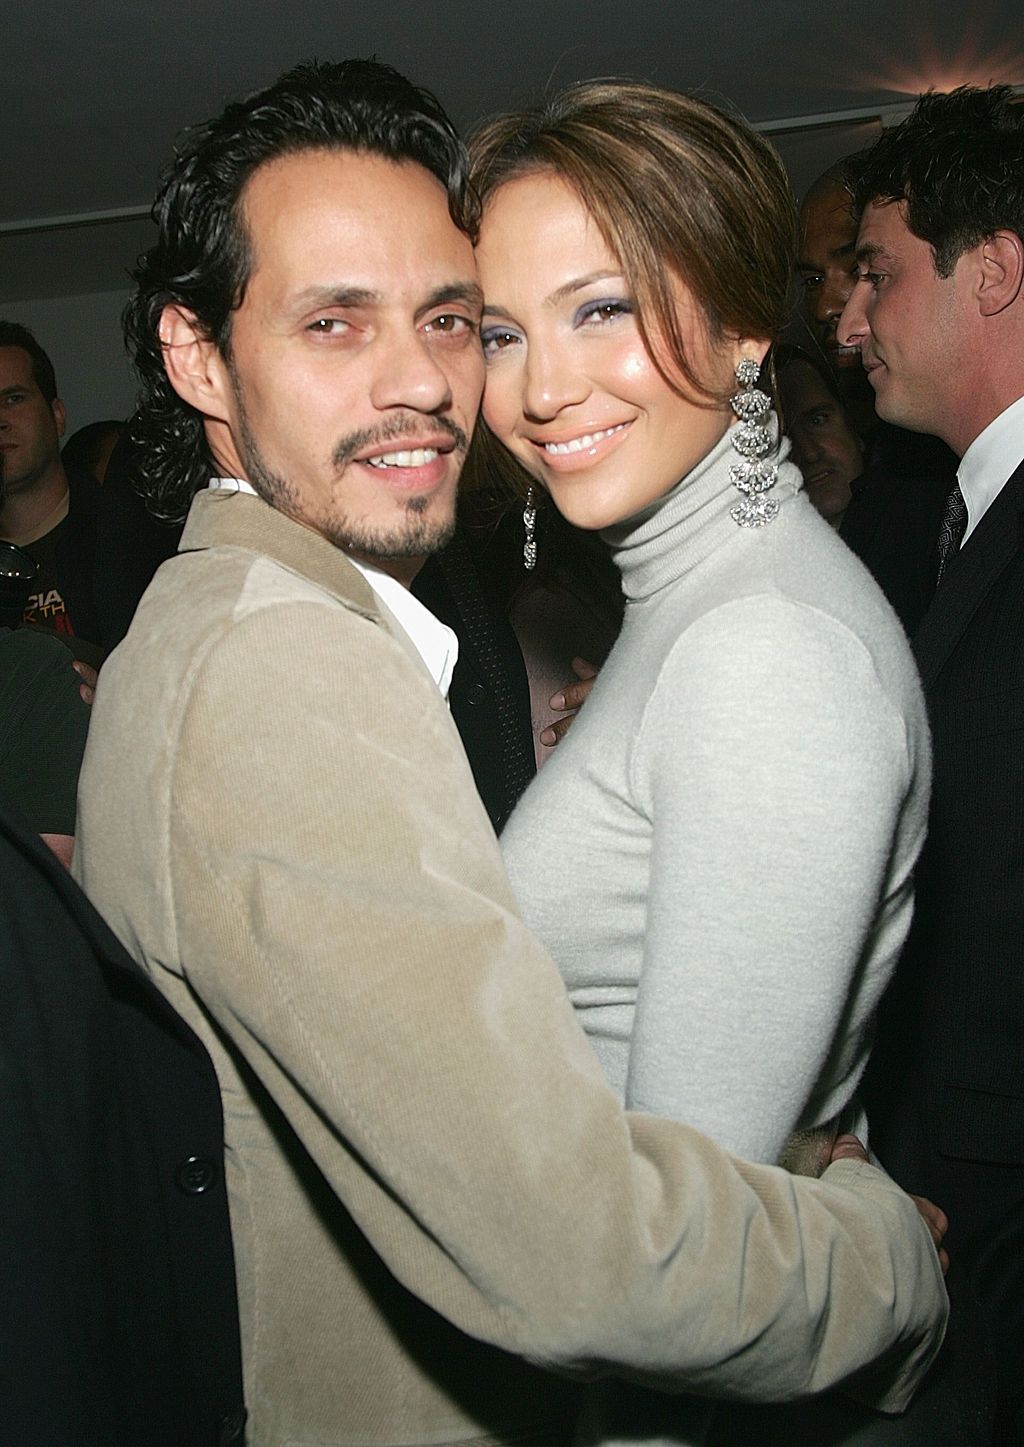 NEW YORK - SEPTEMBER 07:  Singer Marc Anthony and his wife actress Jennifer Lopez attend the premiere of 